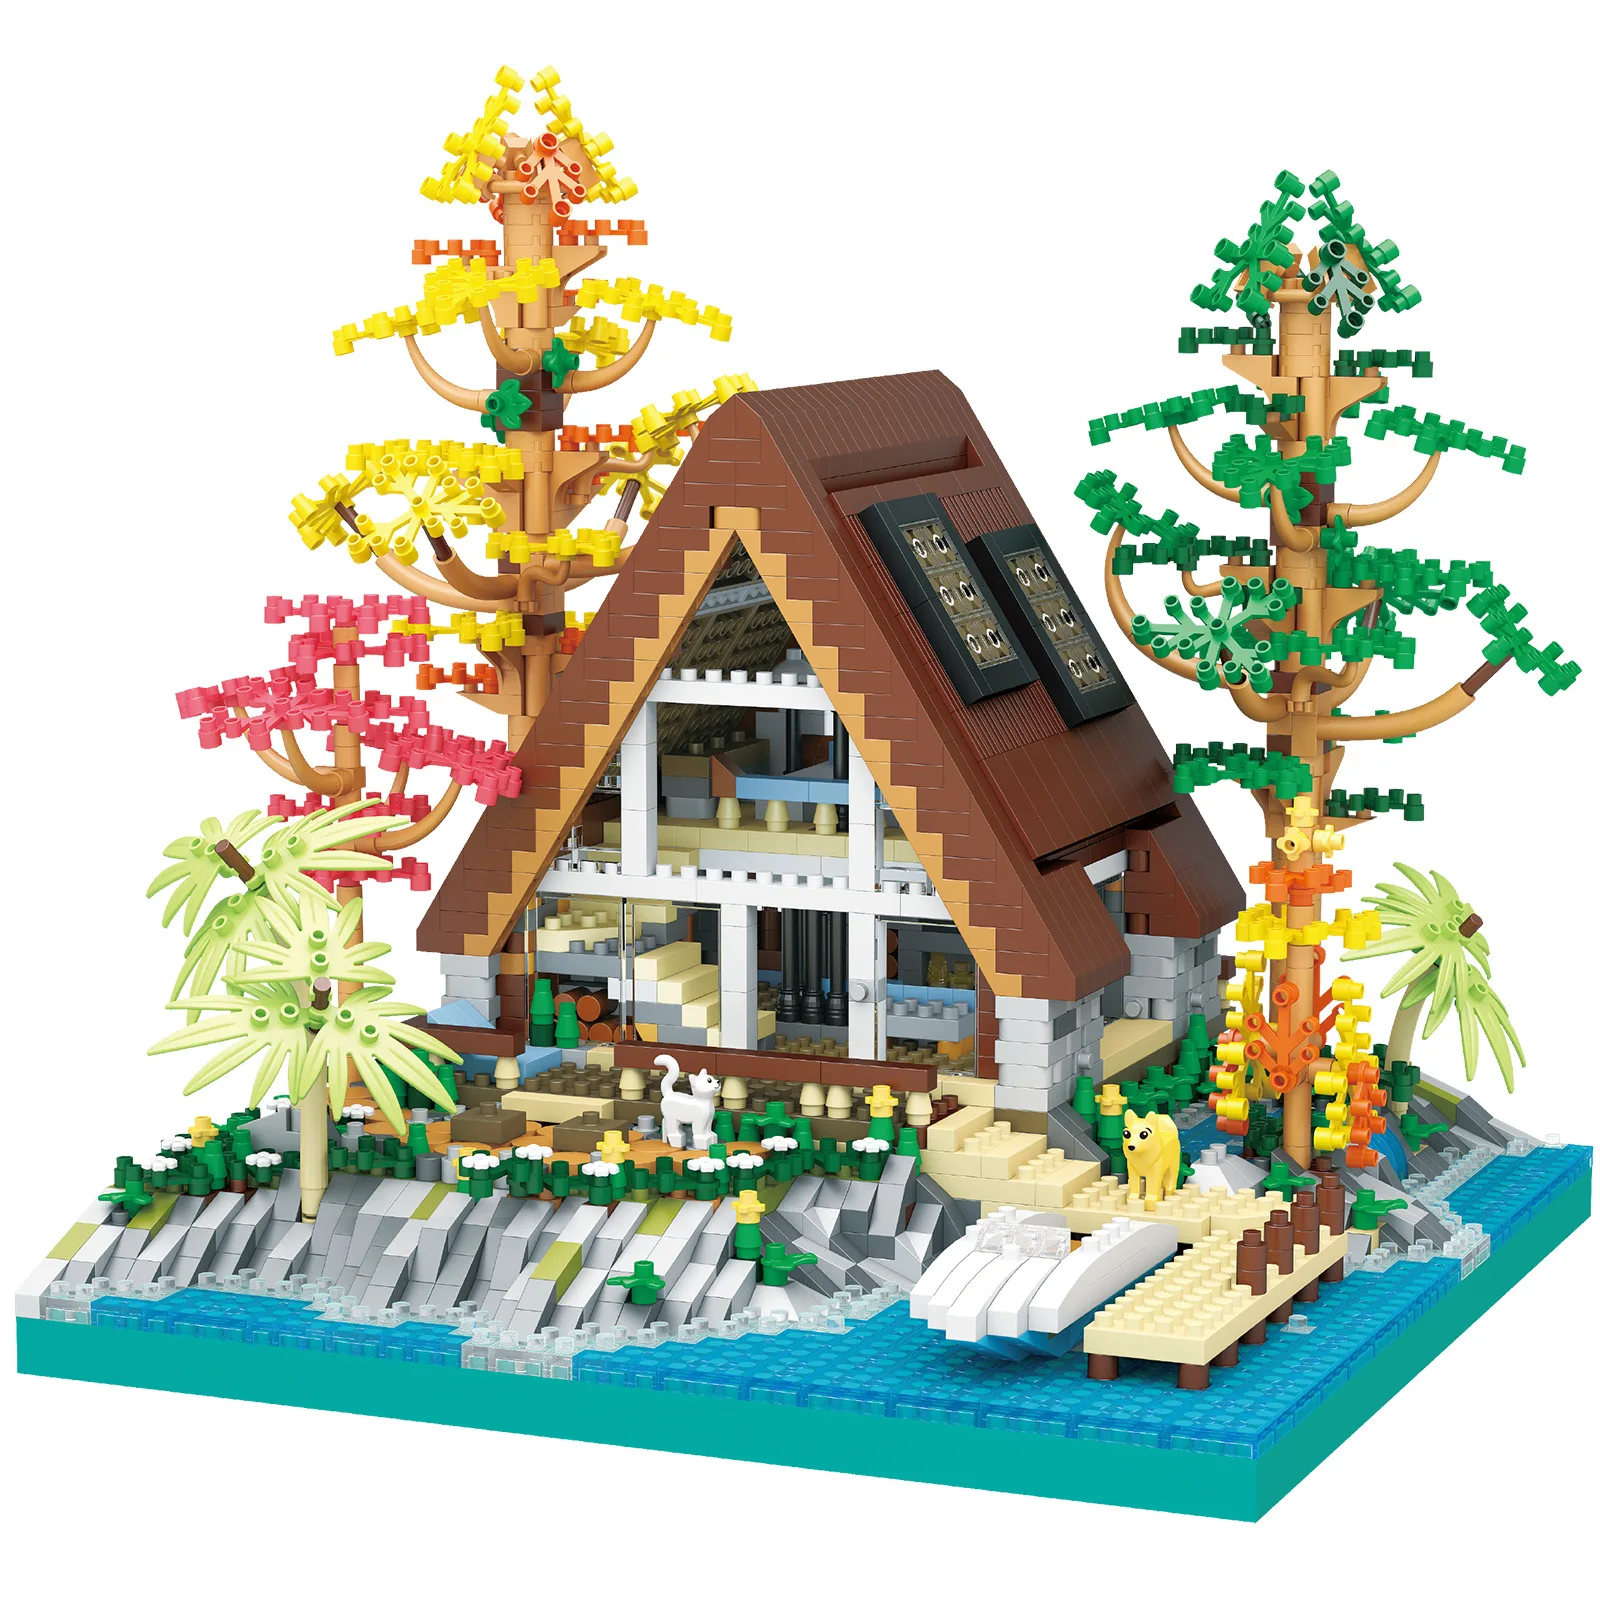 Creative City Street View House Micro Diamond Block Lakeside Cabin Streetscape Model Building Brick Figures Toy For Kids Gifts technical expert high tech super sport racing car martin k85 2008pcs moc modular brick building block model creative toys gifts